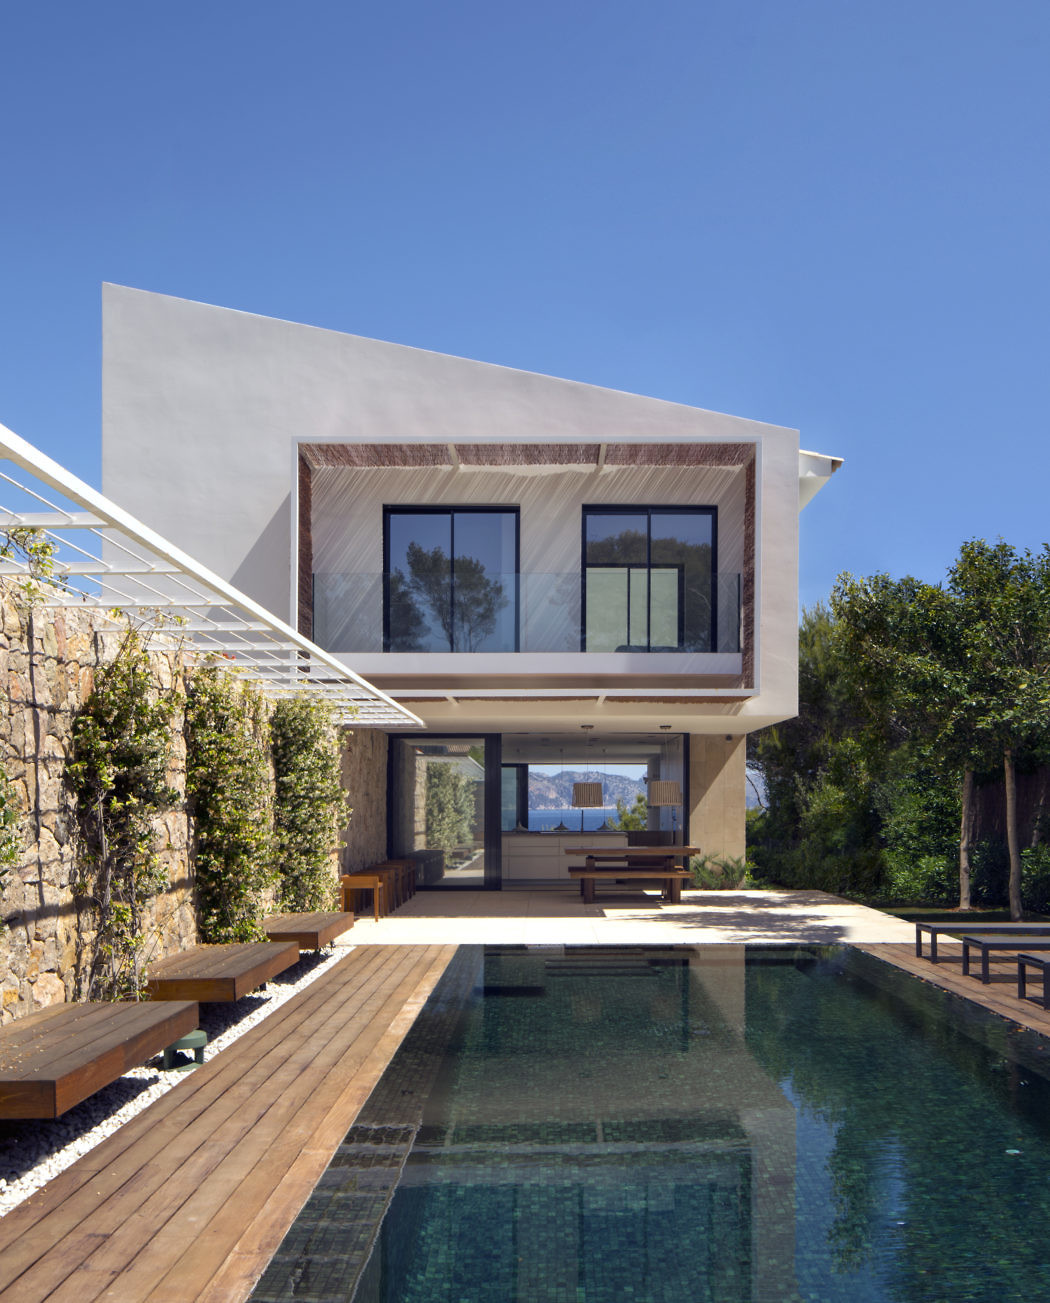 Modern home with large windows overlooking a swimming pool.